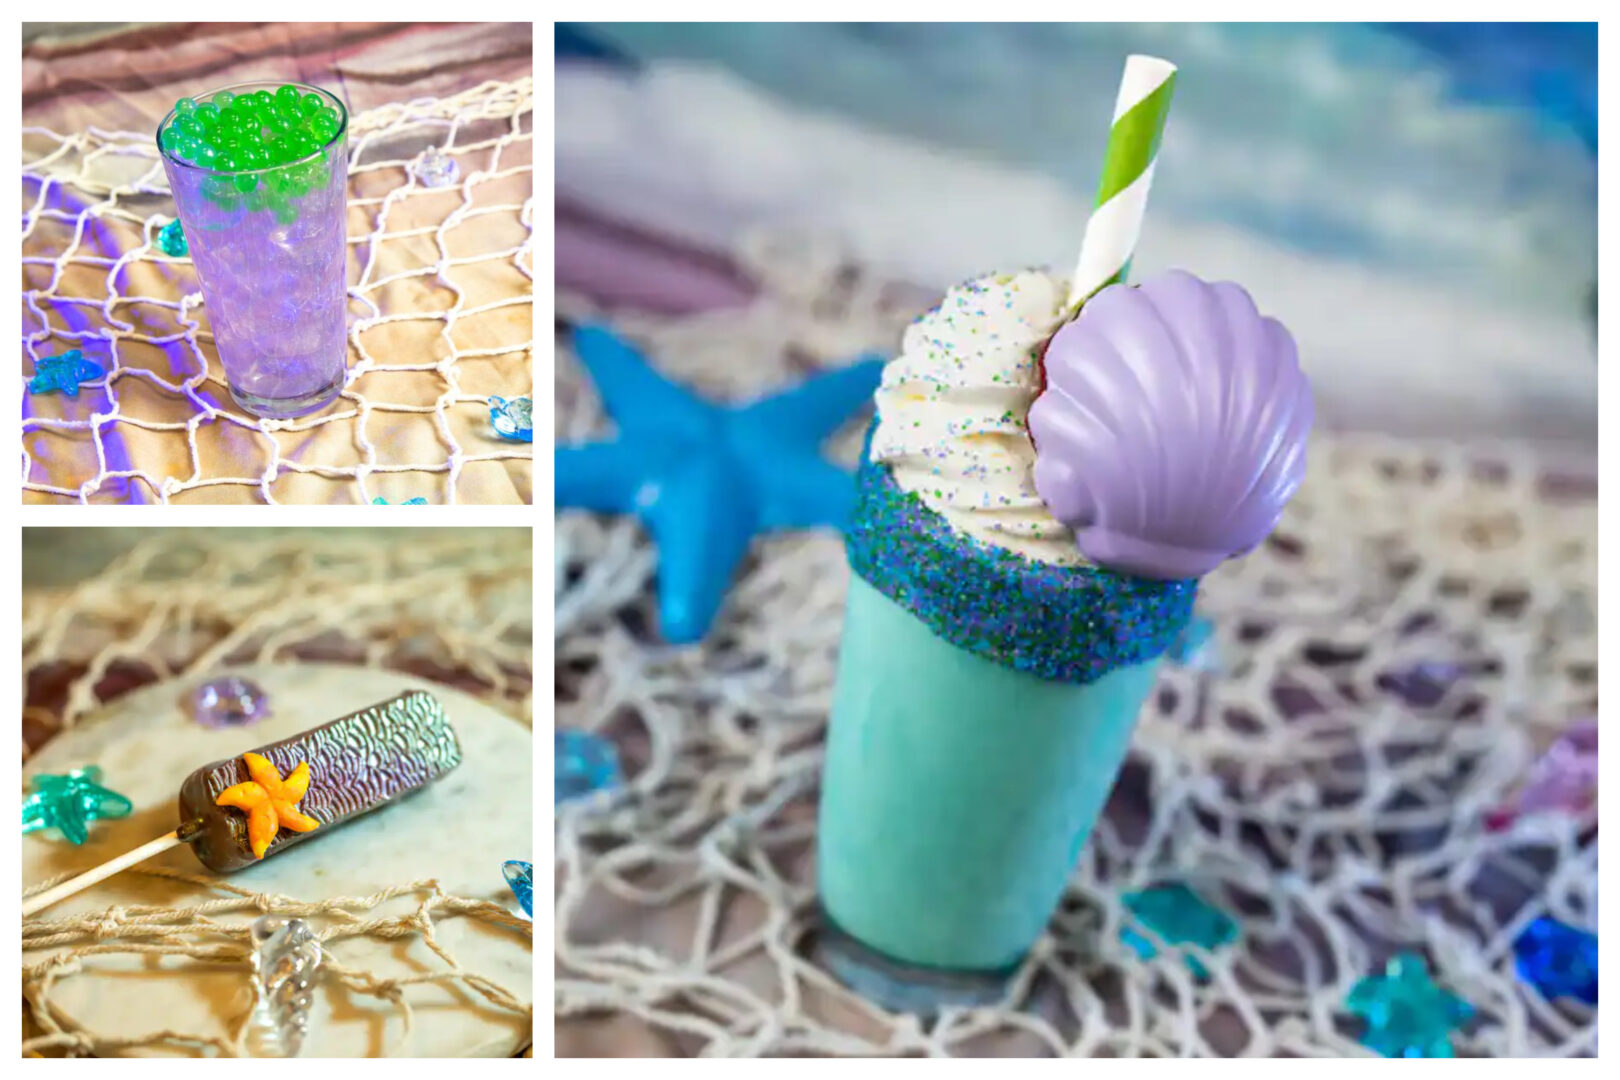 New Live-Action ‘The Little Mermaid’ Sweet Treats and More at Disney World